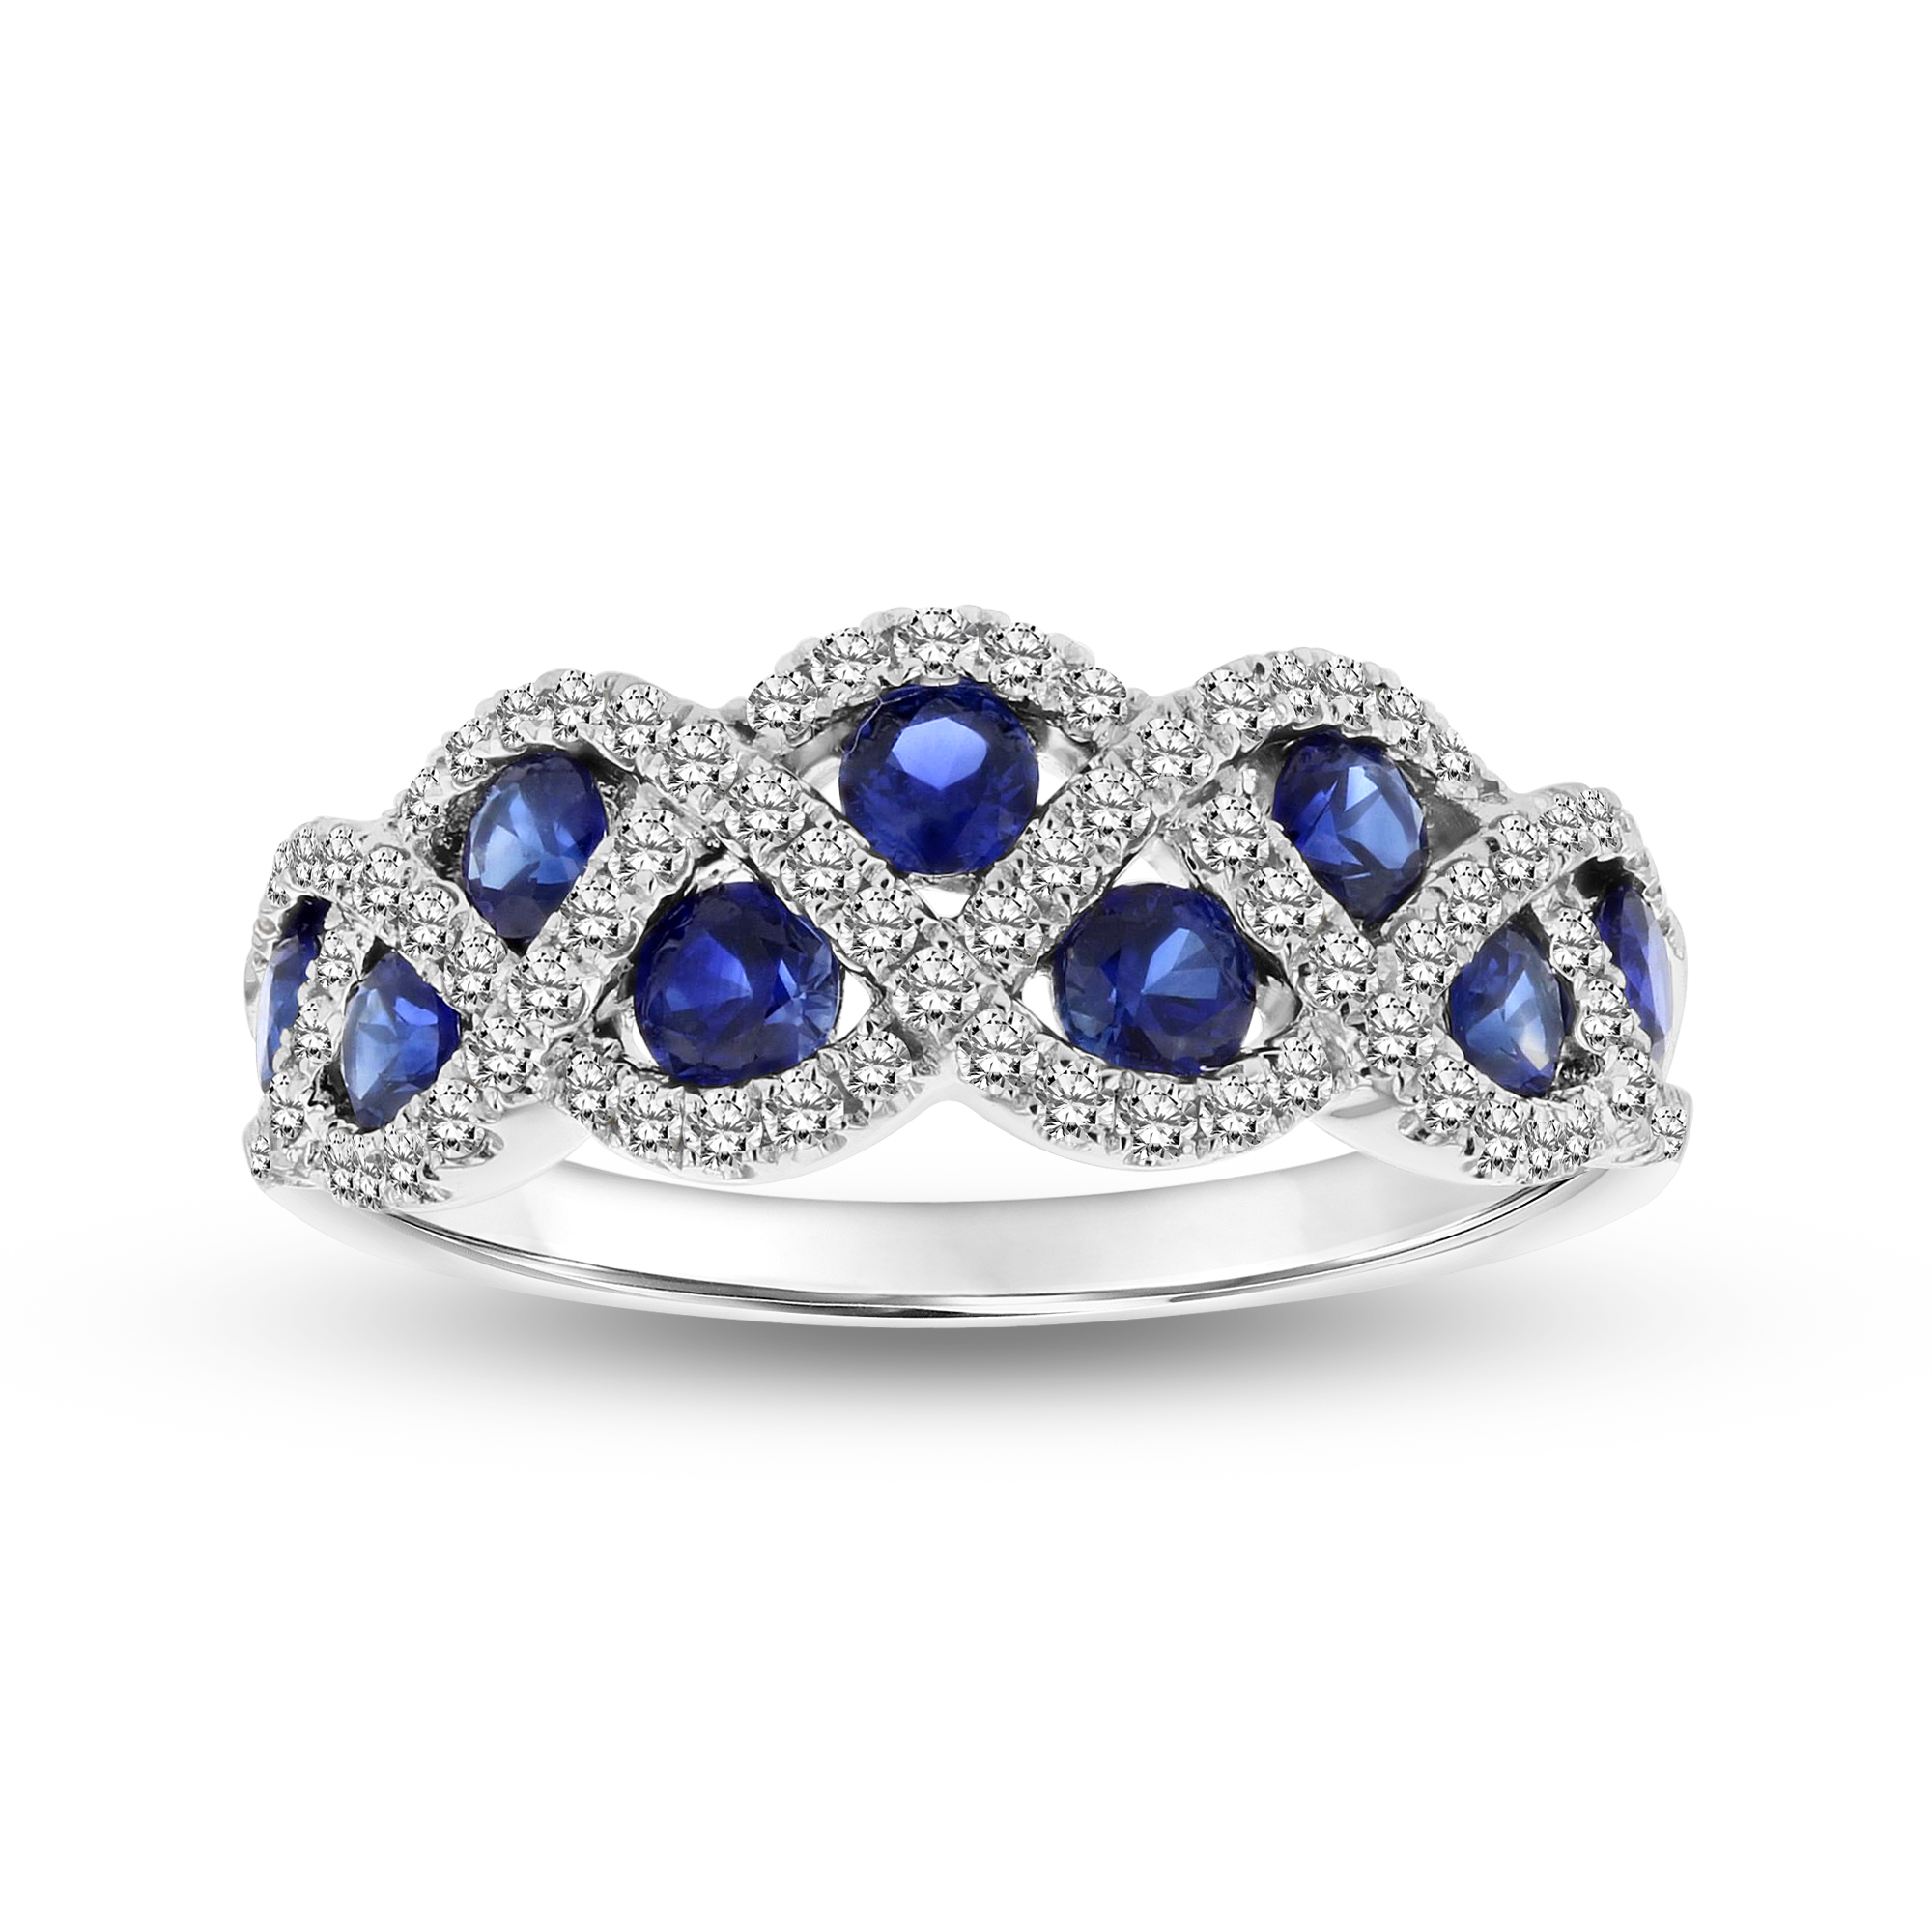 View 1.52ctw Diamond and Sapphire Band in 18k White Gold